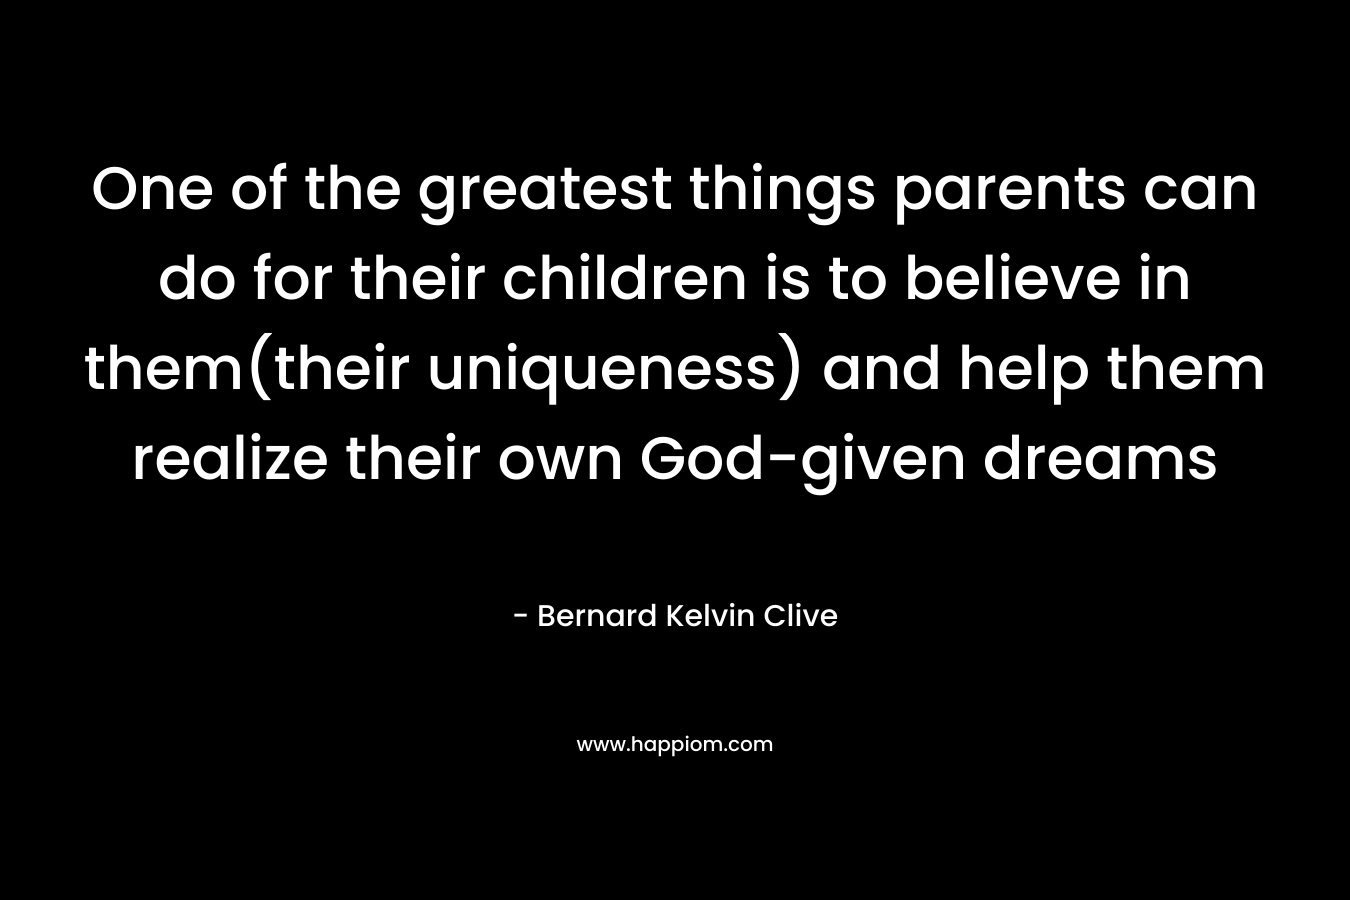 One of the greatest things parents can do for their children is to believe in them(their uniqueness) and help them realize their own God-given dreams